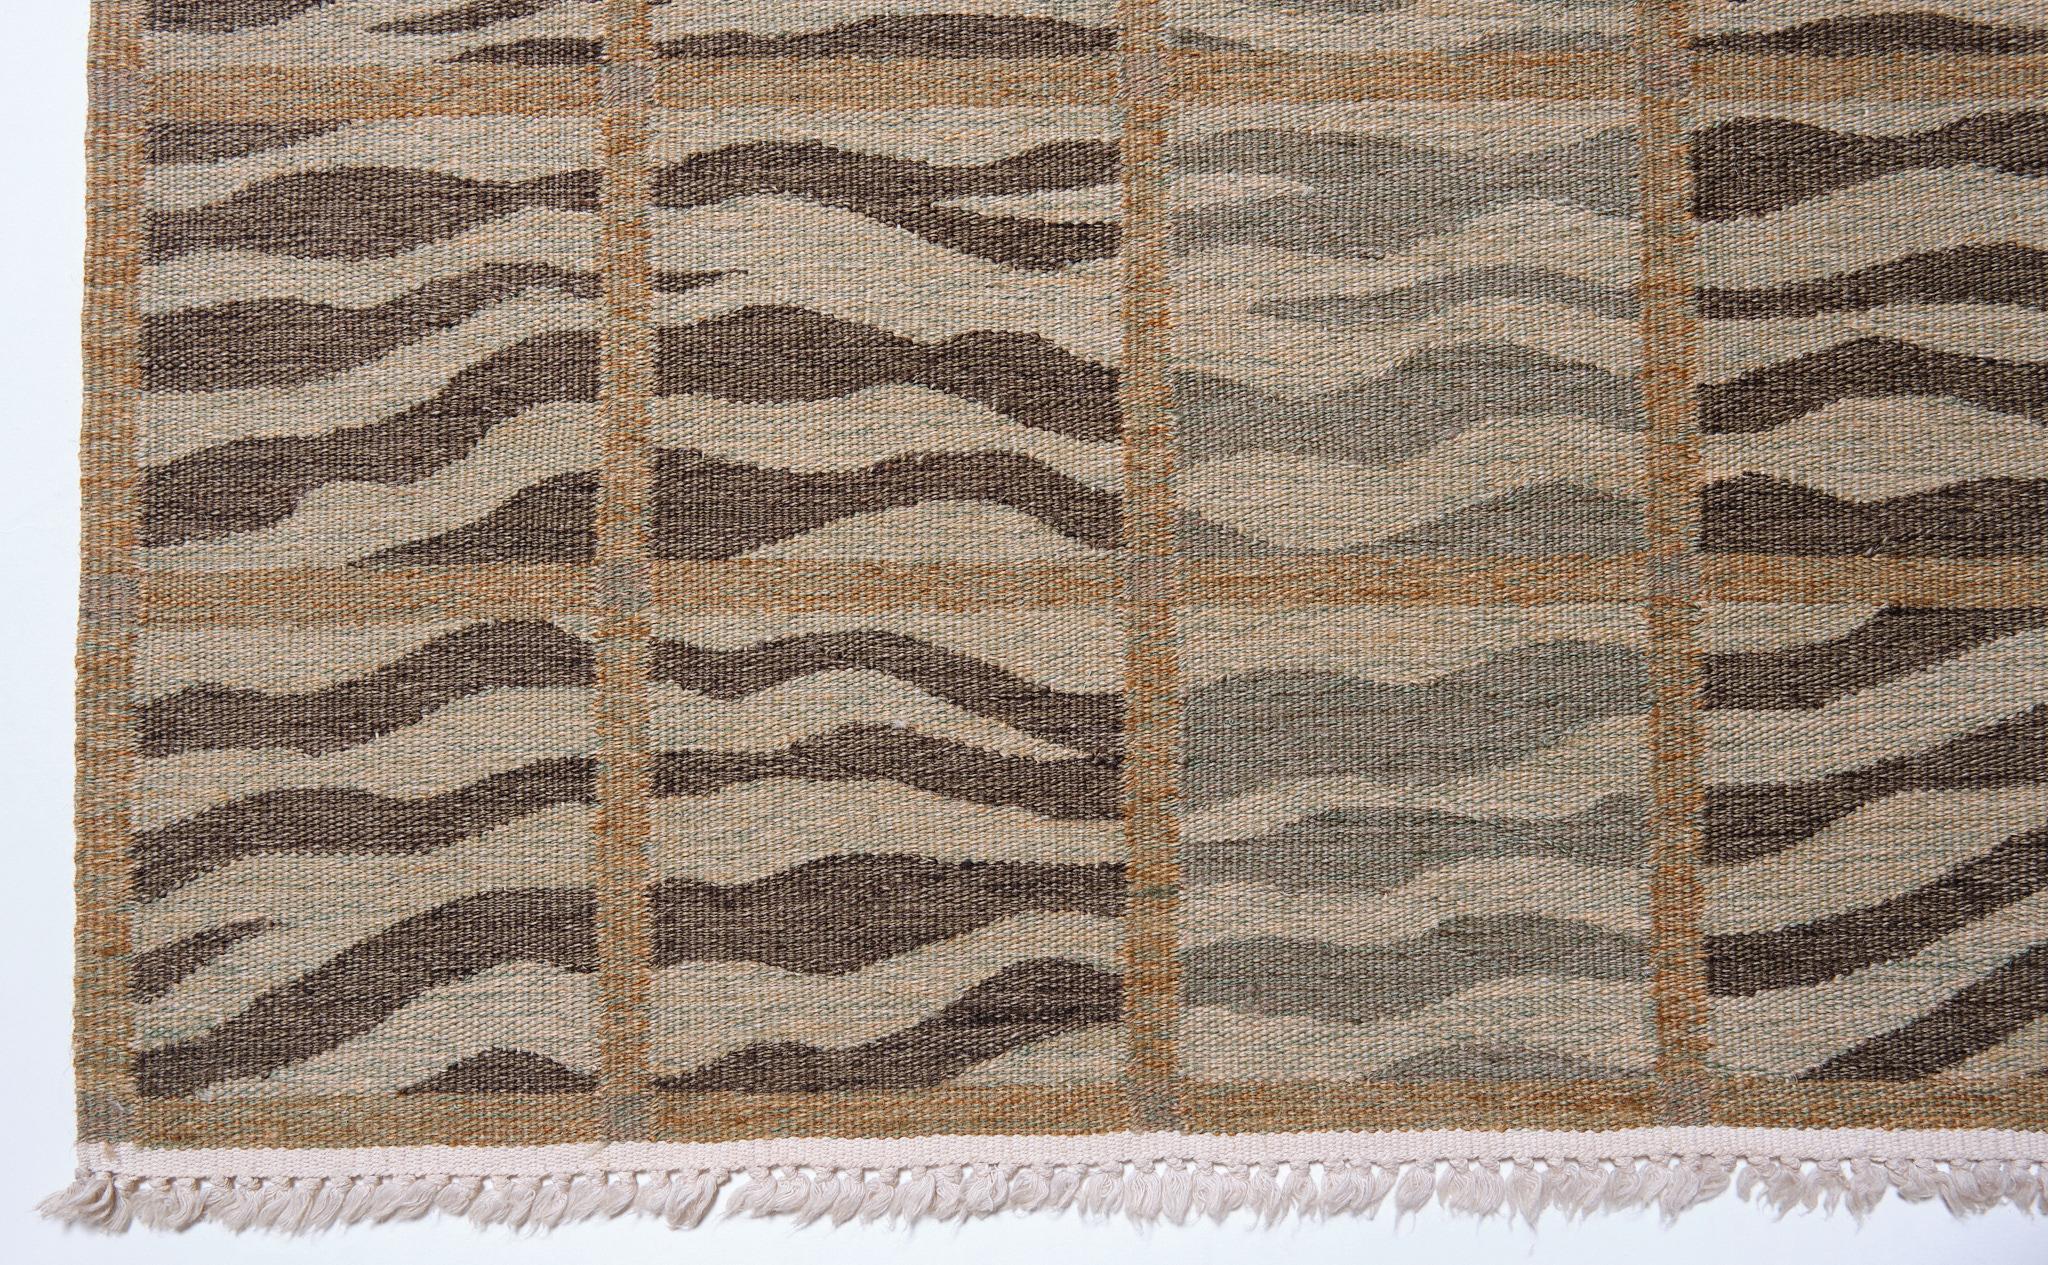 This is a Modern Flatwoven Kilim Rug from Turkey with a rare and beautiful color composition.

A modern Kilim with a very sharp impression, with very chic shades of brown and beige and an arrangement of zebra patterns.
It is very easy to match